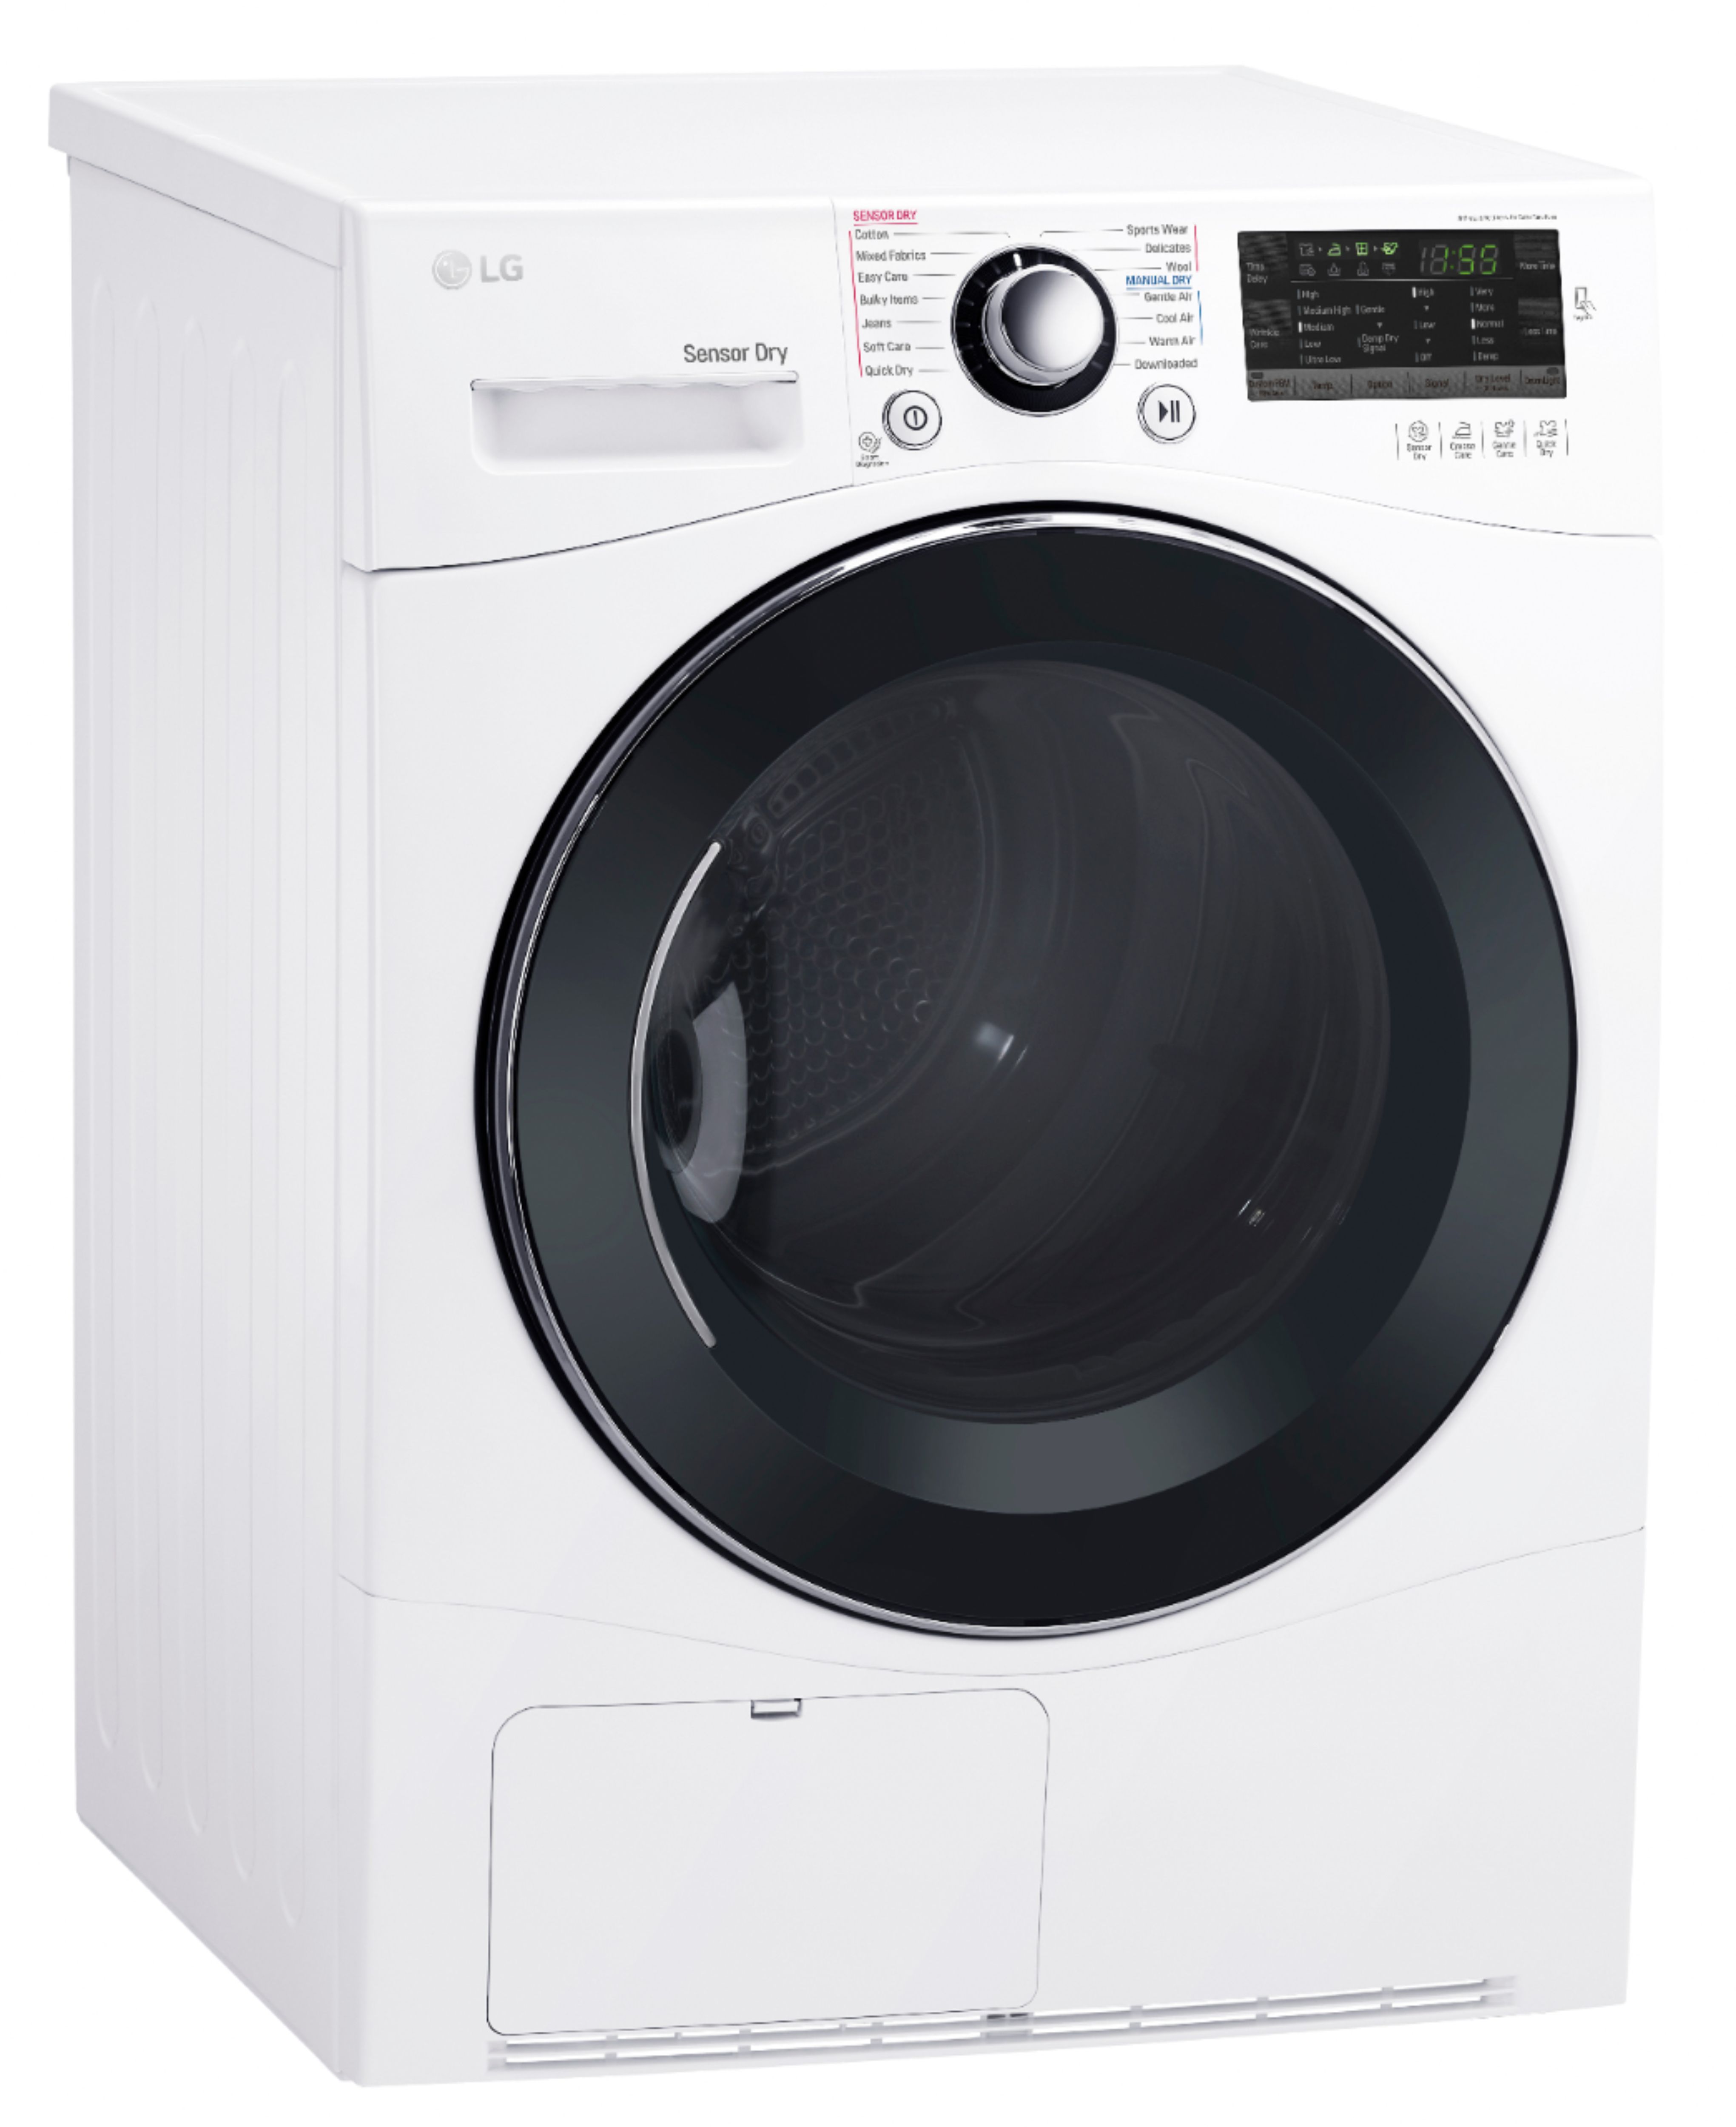 Angle View: LG - 4.2 Cu. Ft. Electric Dryer with Sensor Dry - White